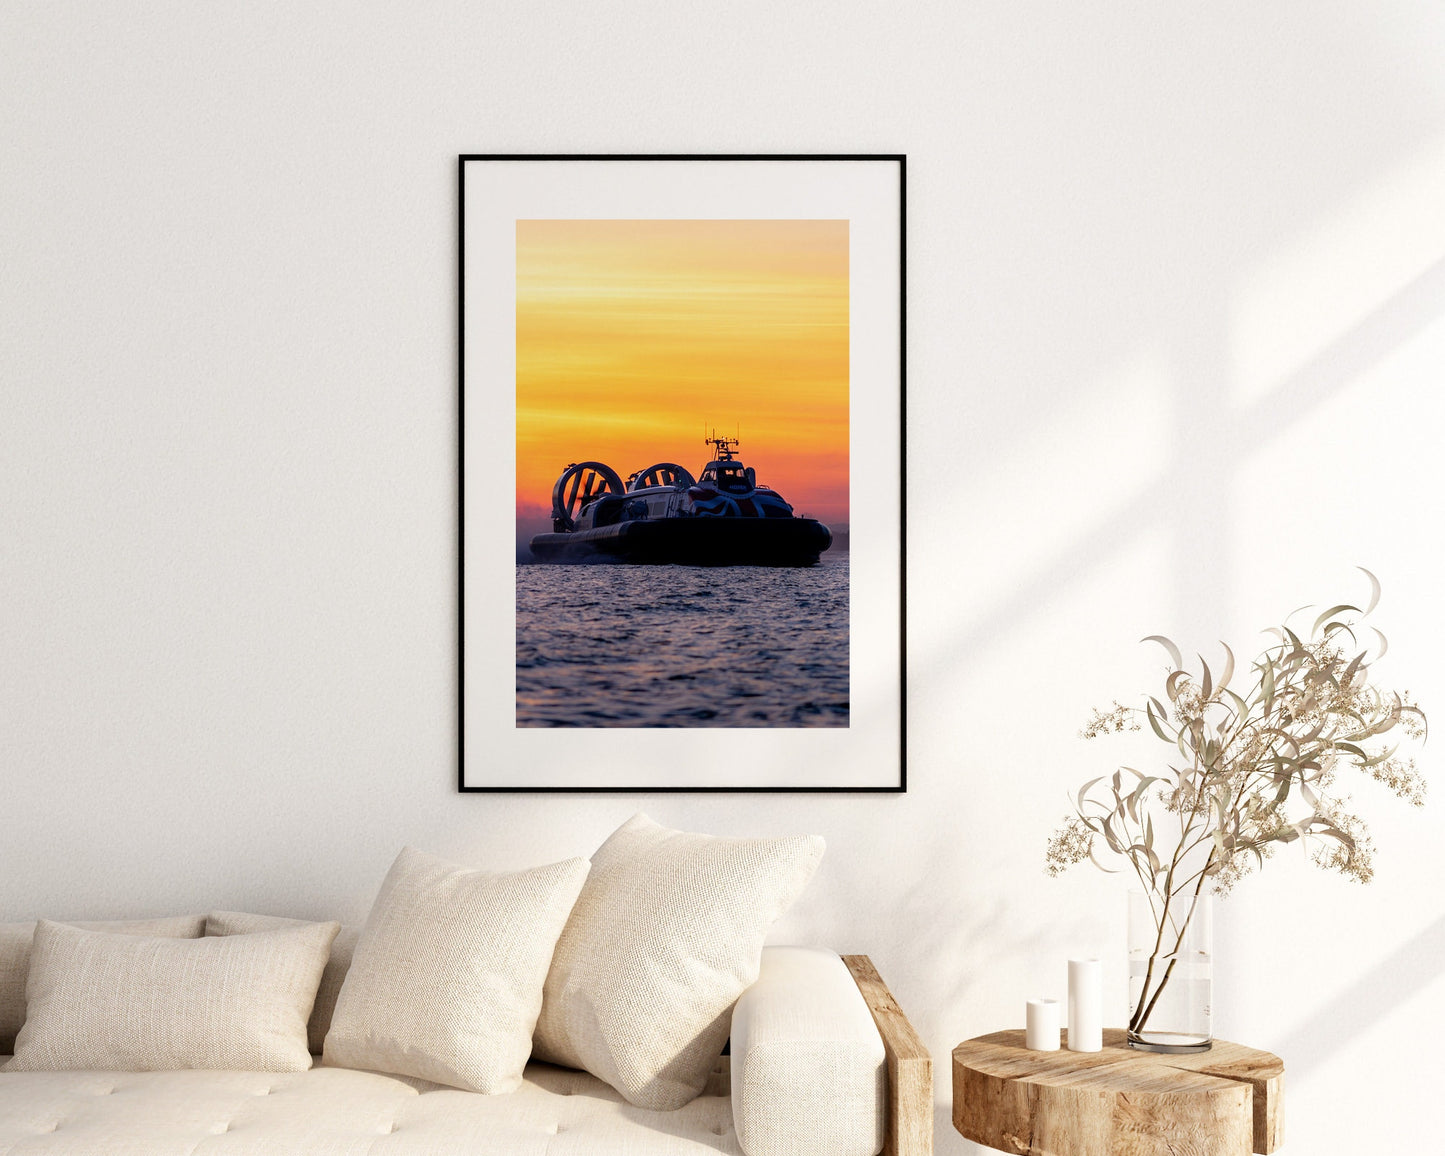 Southsea Hovercraft - Photography Print - Portsmouth and Southsea Prints - Wall Art -  Frame and Canvas Options - Portrait